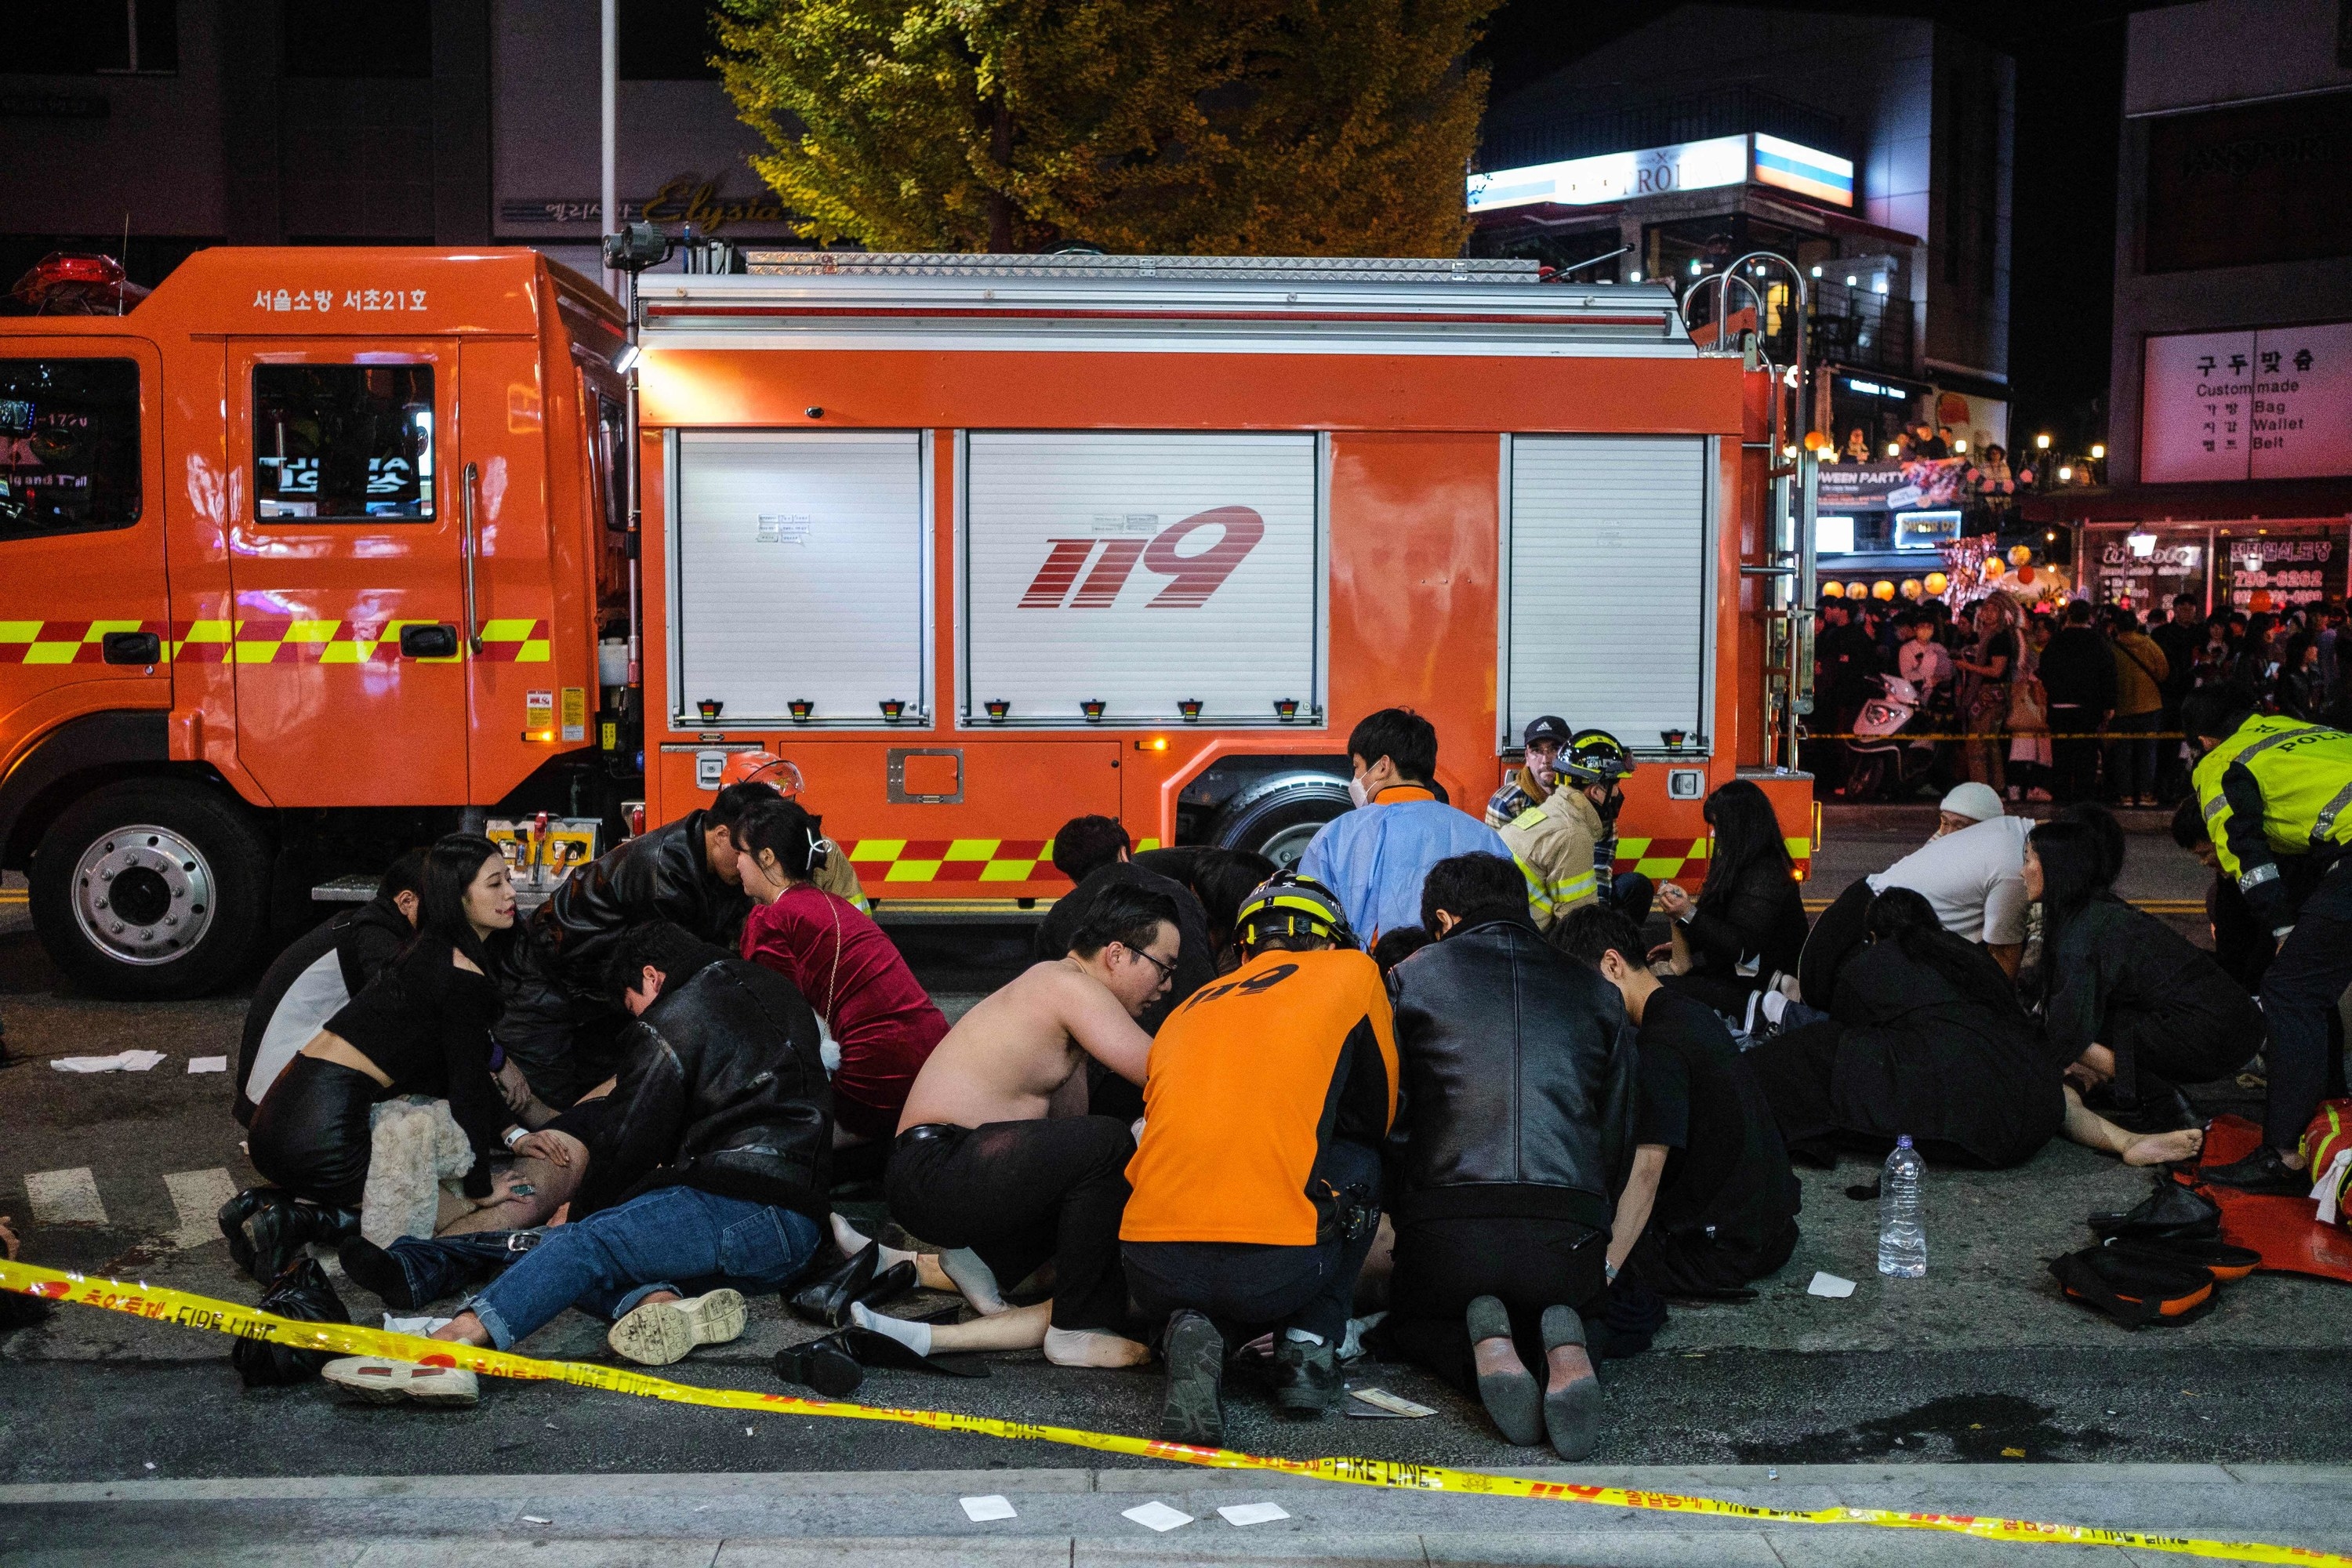 People lying on the ground as others kneel over them in front of a large vehicle